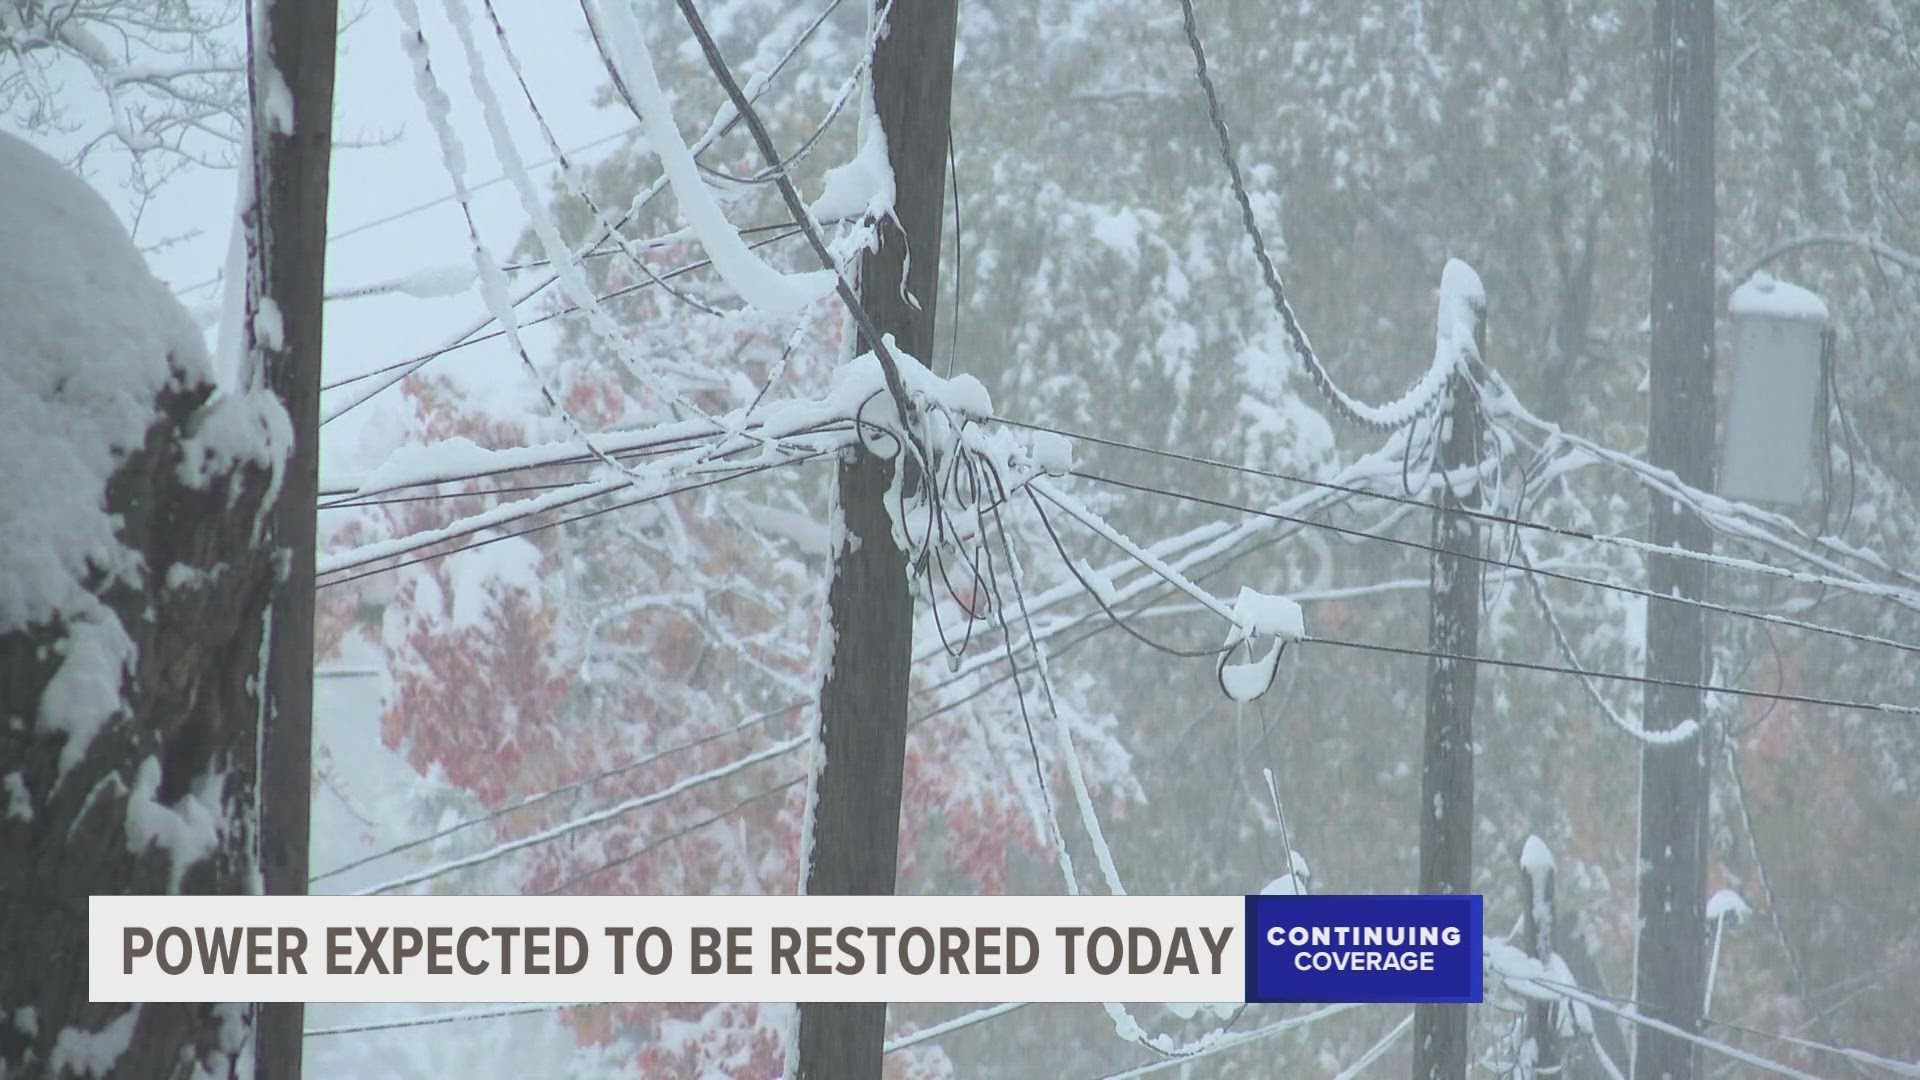 Consumers Energy has more than 200 crews out working to restore power to thousands in the dark in Muskegon County.